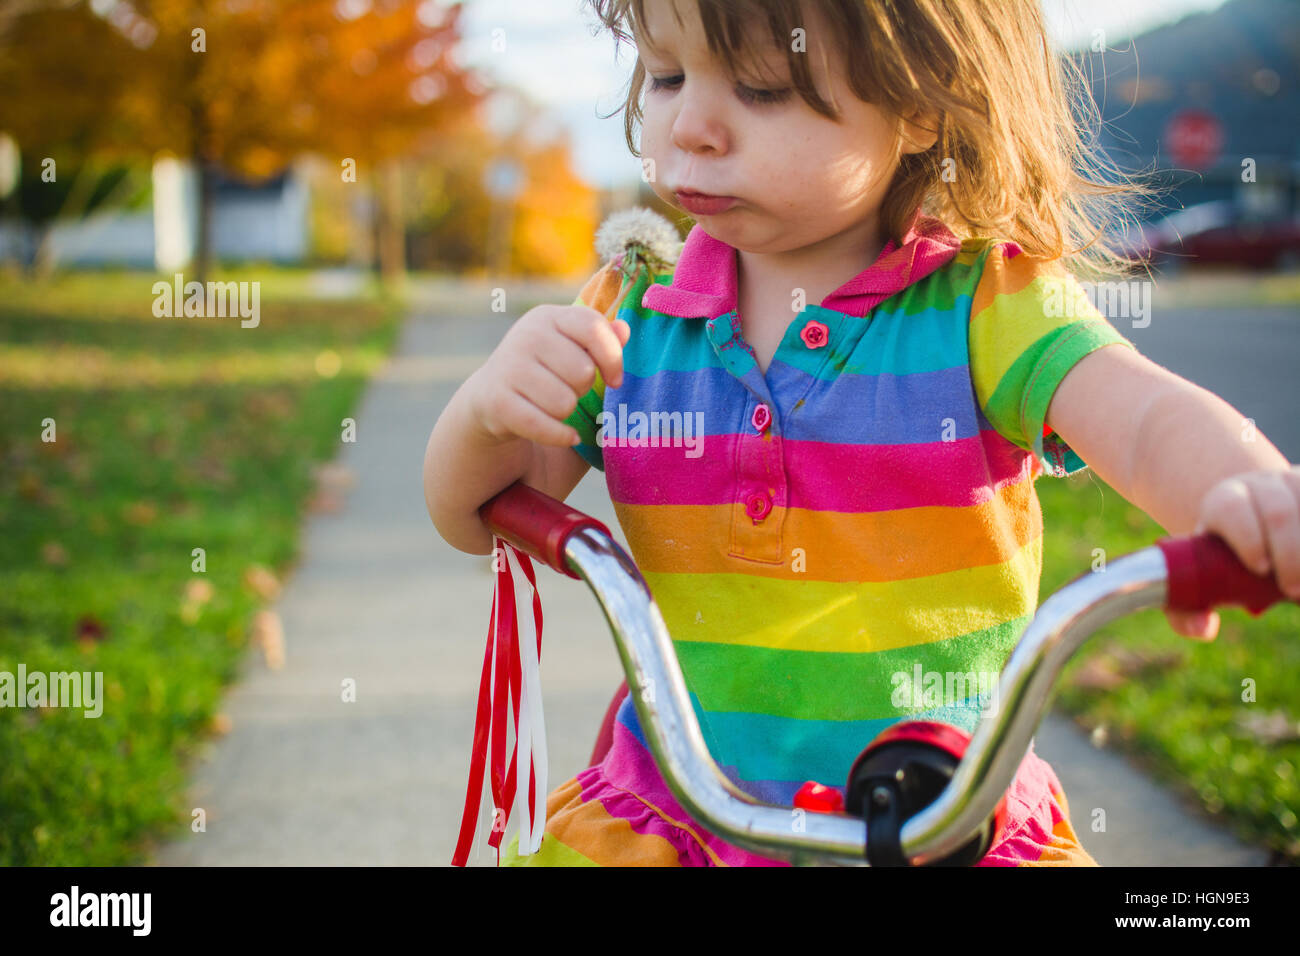 A young girl holds a dandelion while sitting on a tricycle. Stock Photo